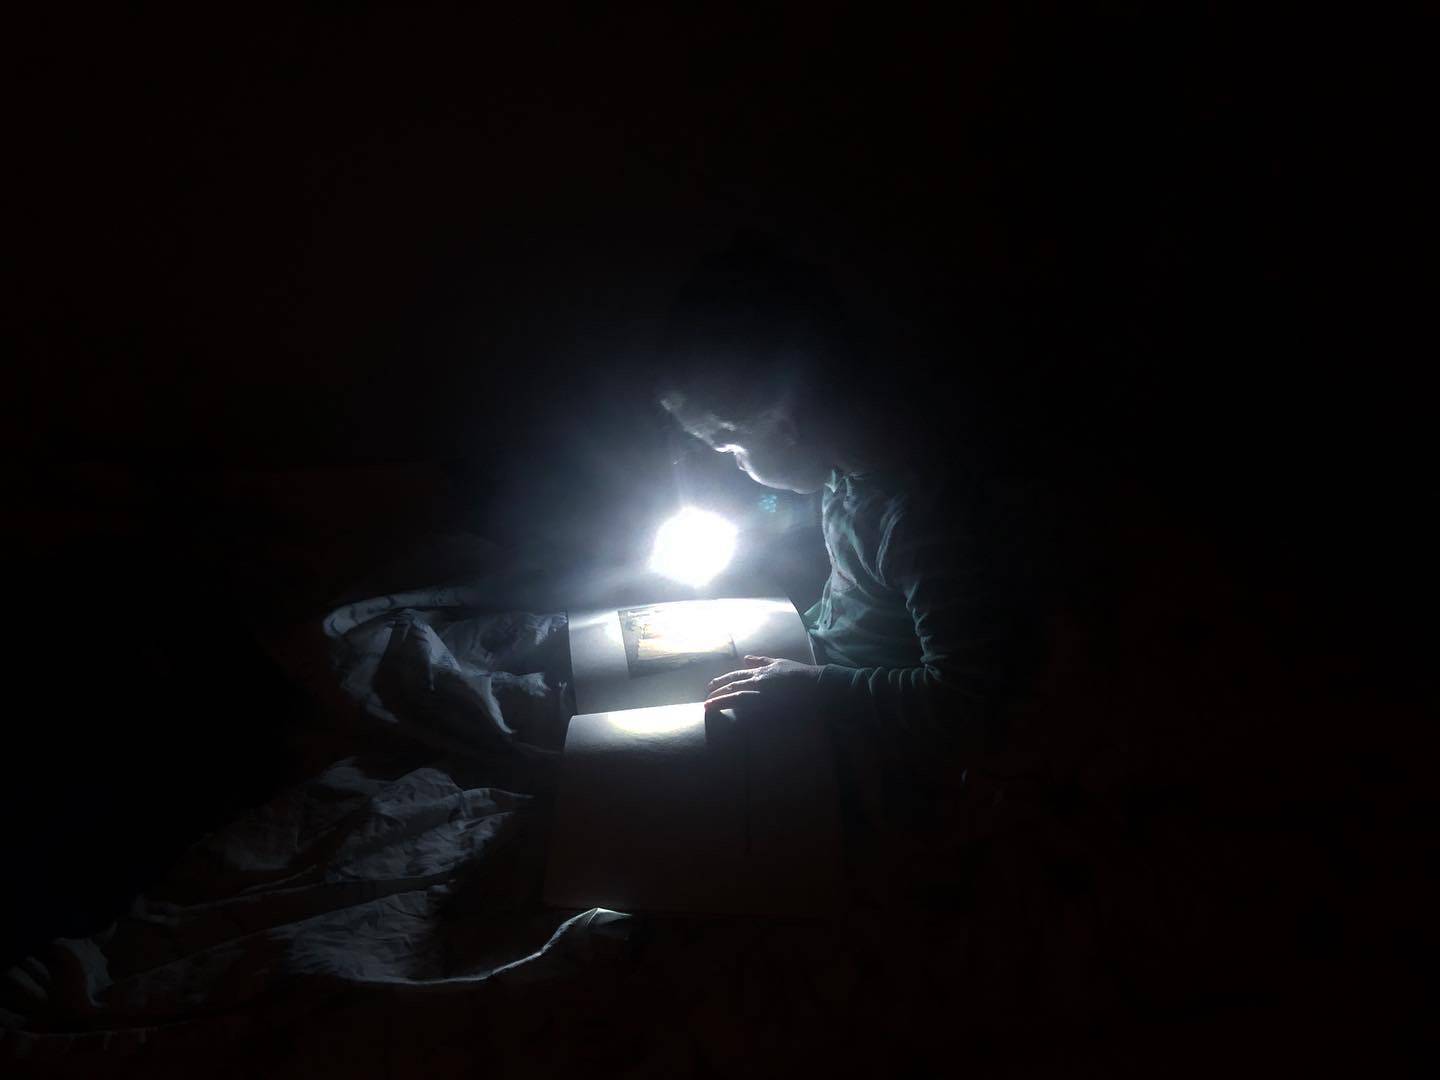 A dark room with a child seated in bed. The child is reading a book by the light of a flashlight. Photo by Alyssa Buckley.